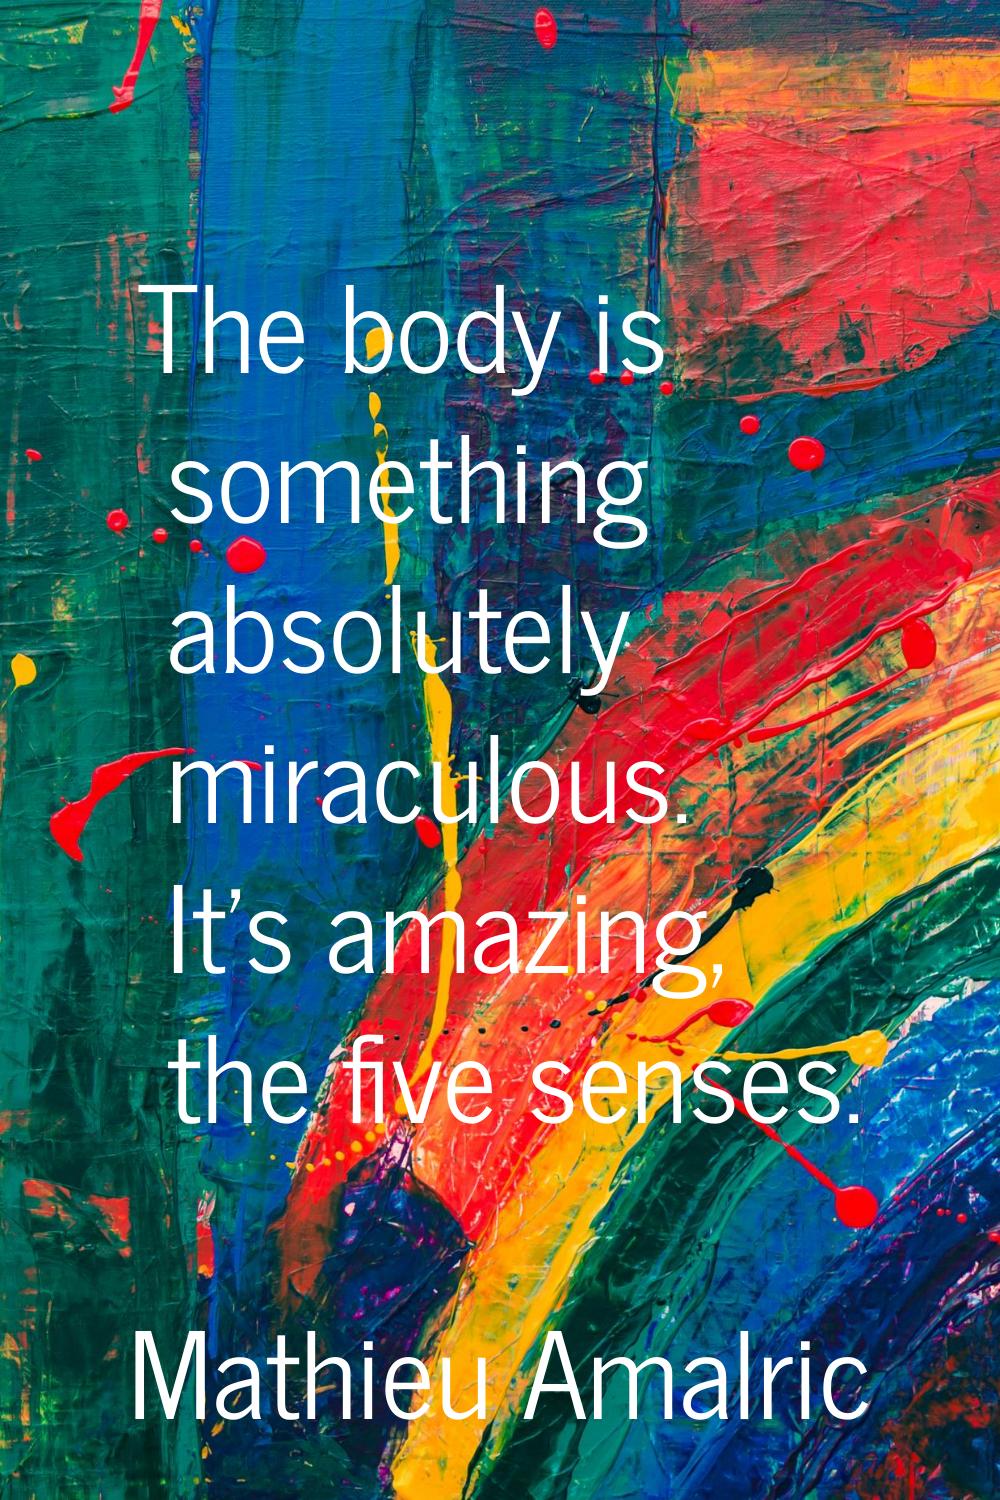 The body is something absolutely miraculous. It's amazing, the five senses.